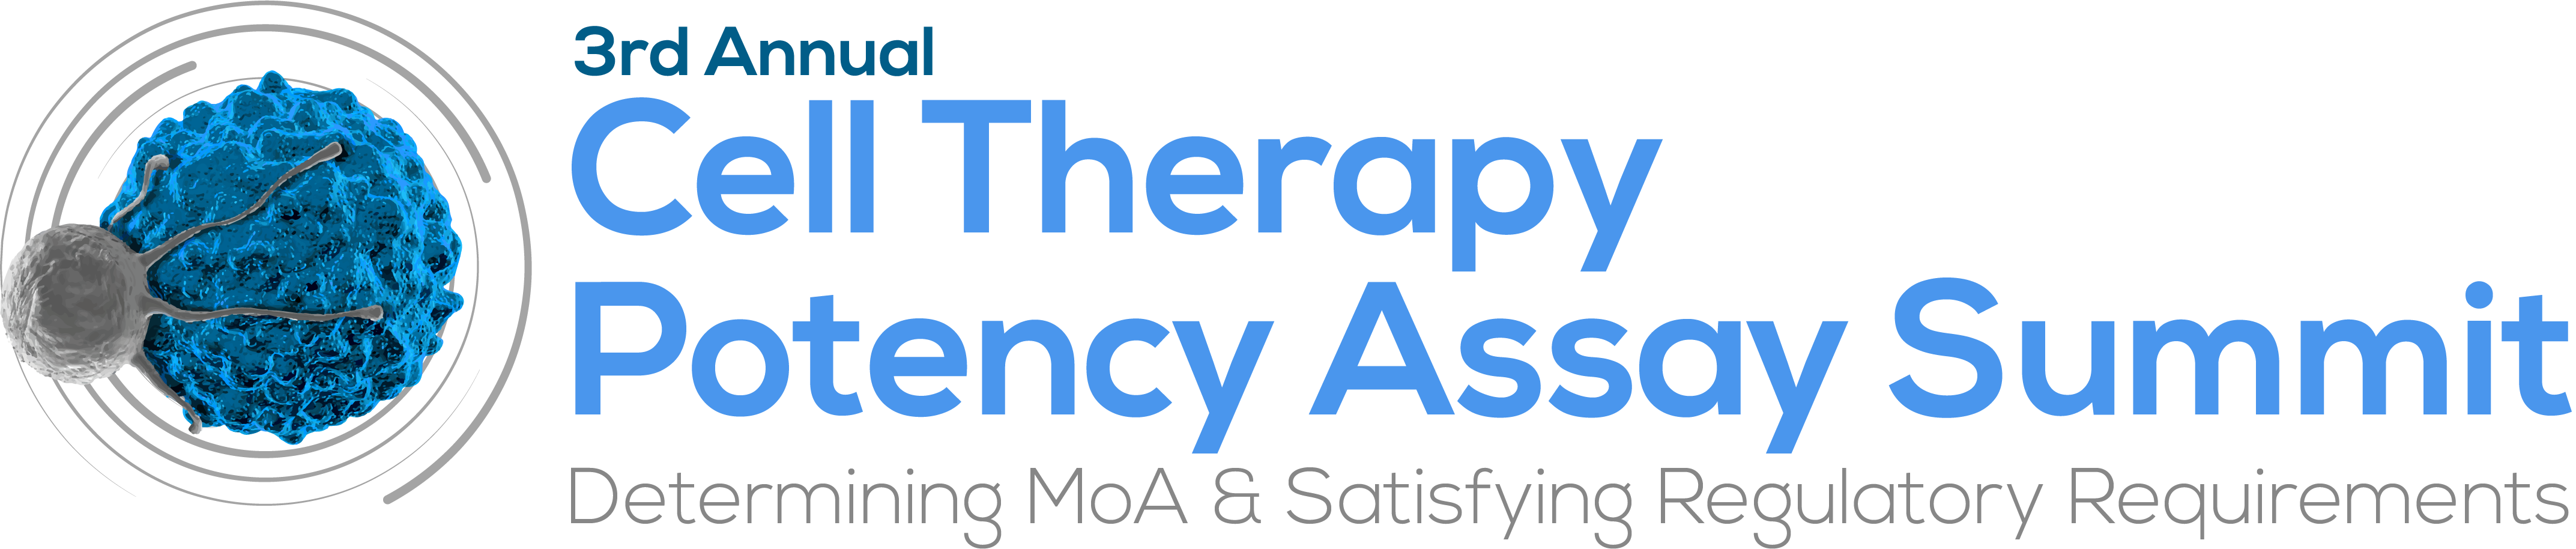 3rd Annual Cell Therapy Potency Assay Summit